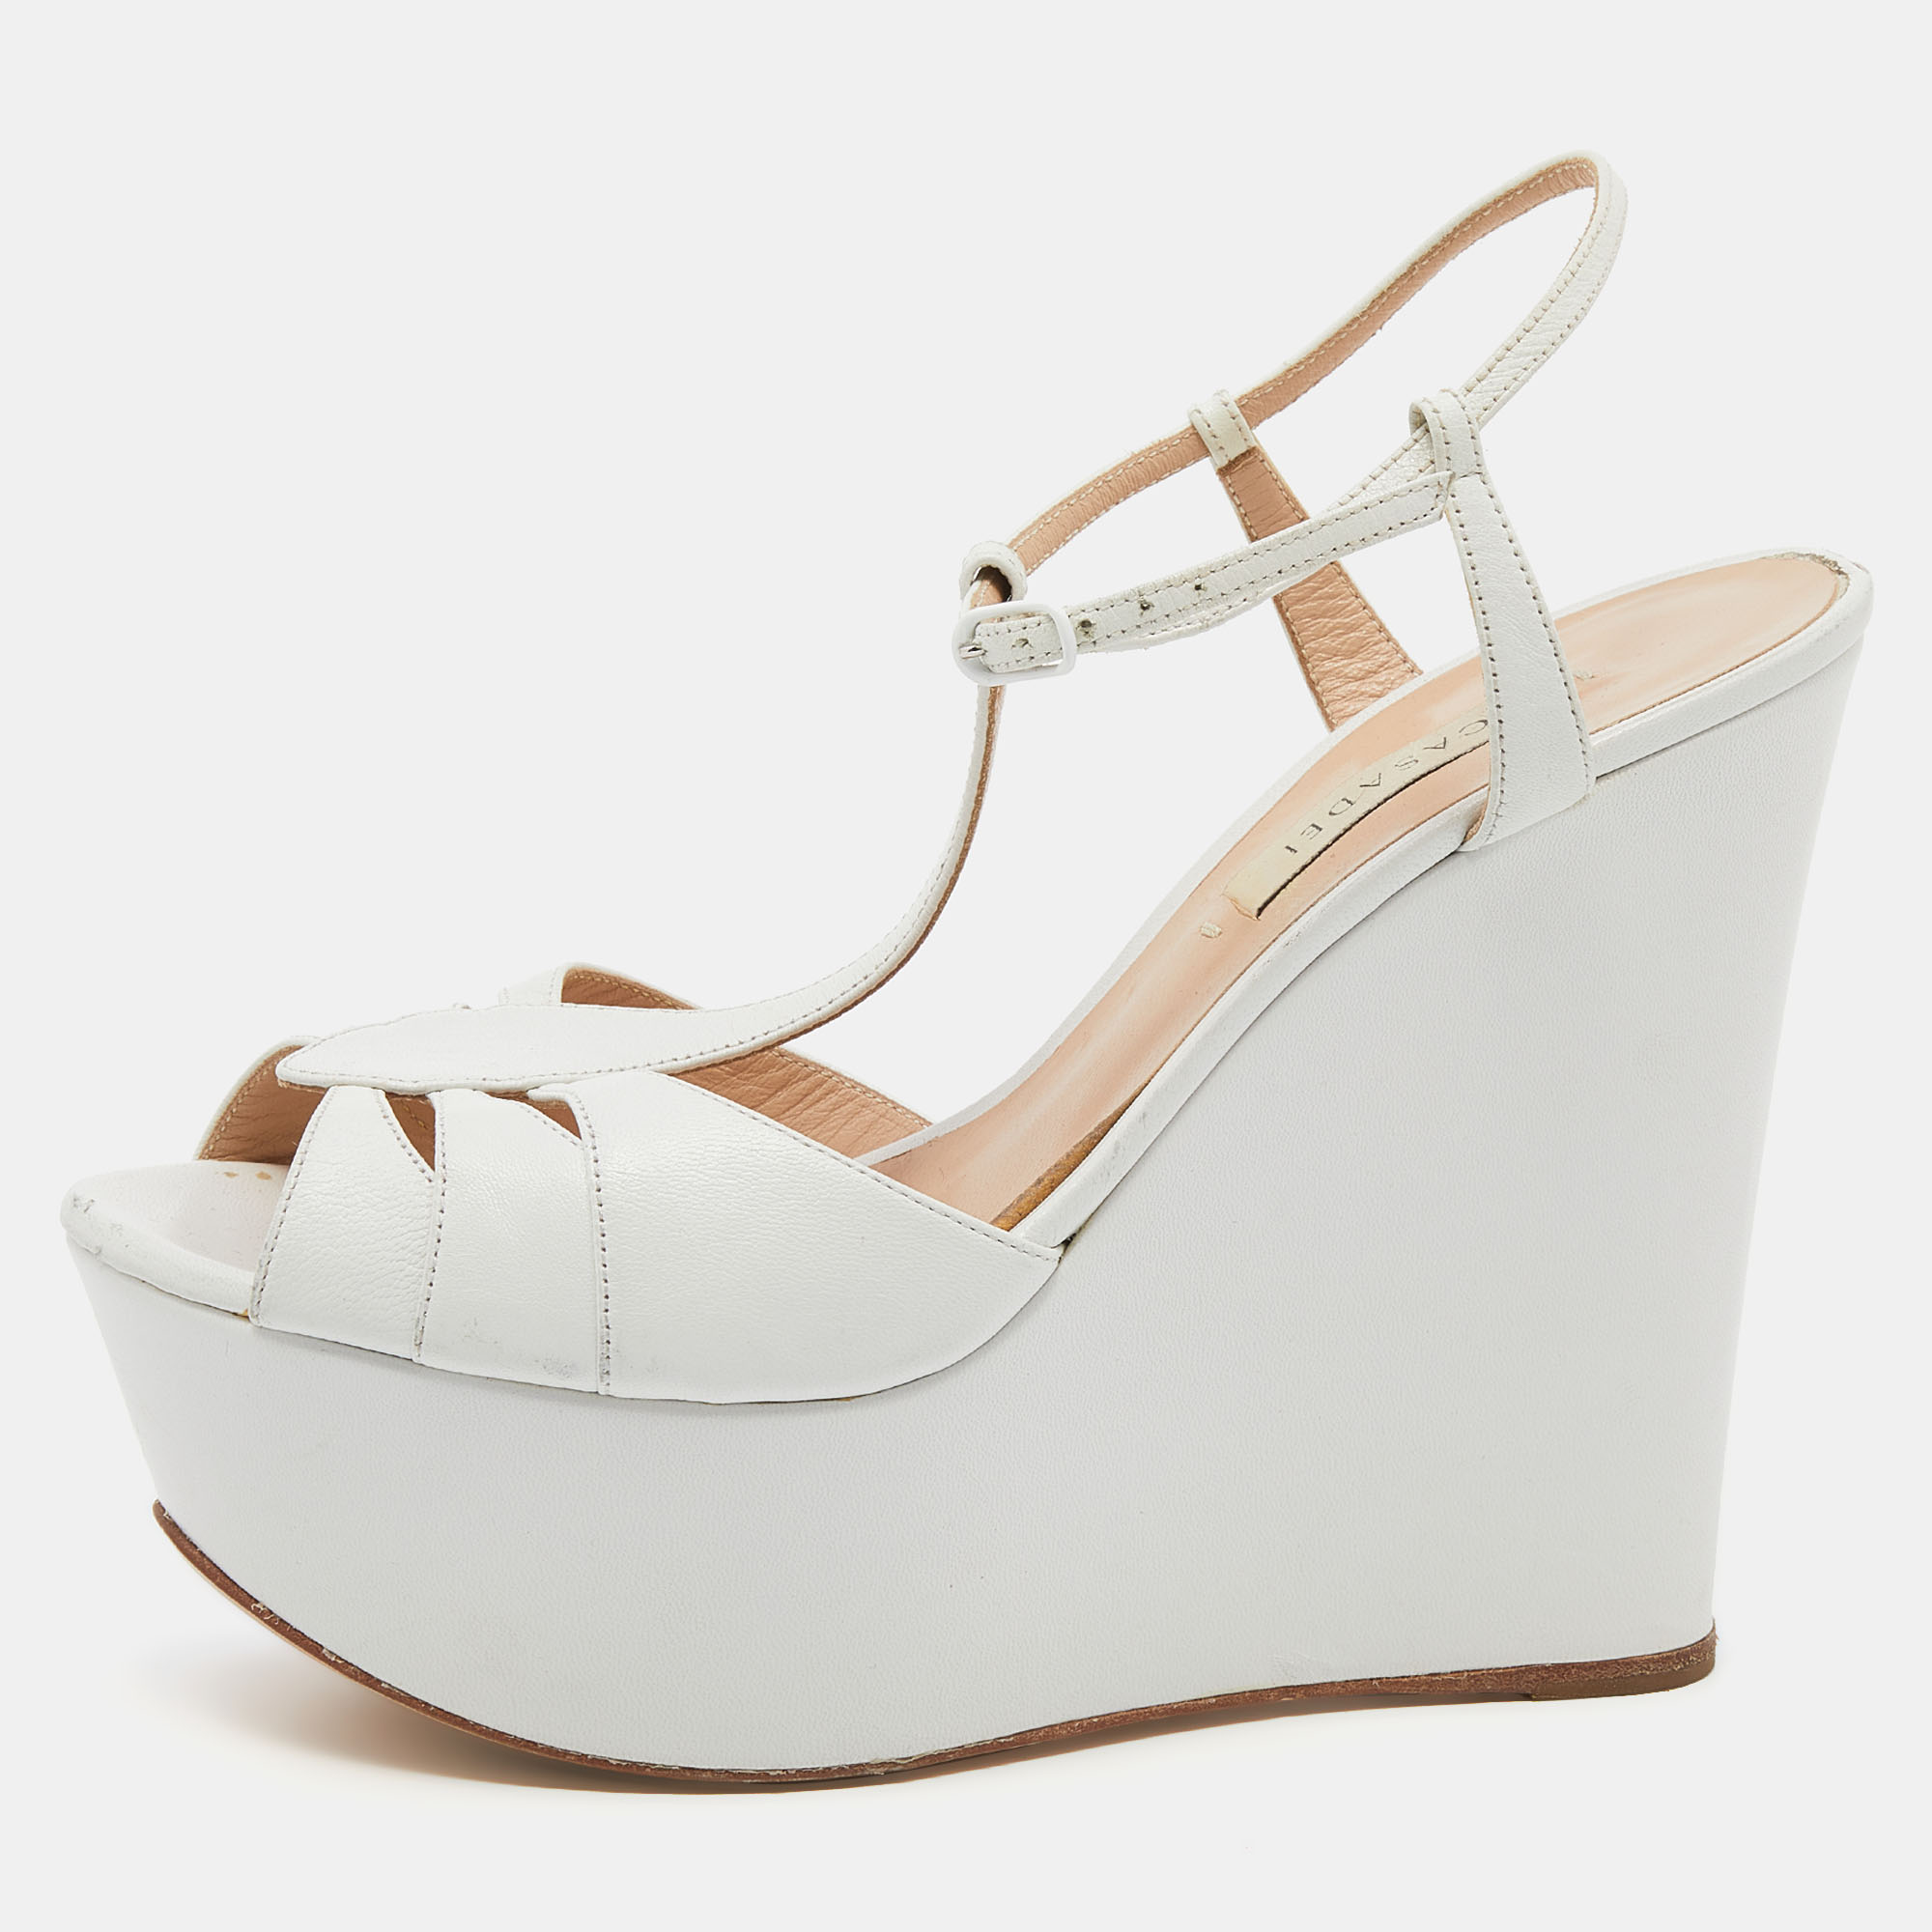 Pre-owned Casadei White Leather Wedge Platform T-strap Sandals Size 38